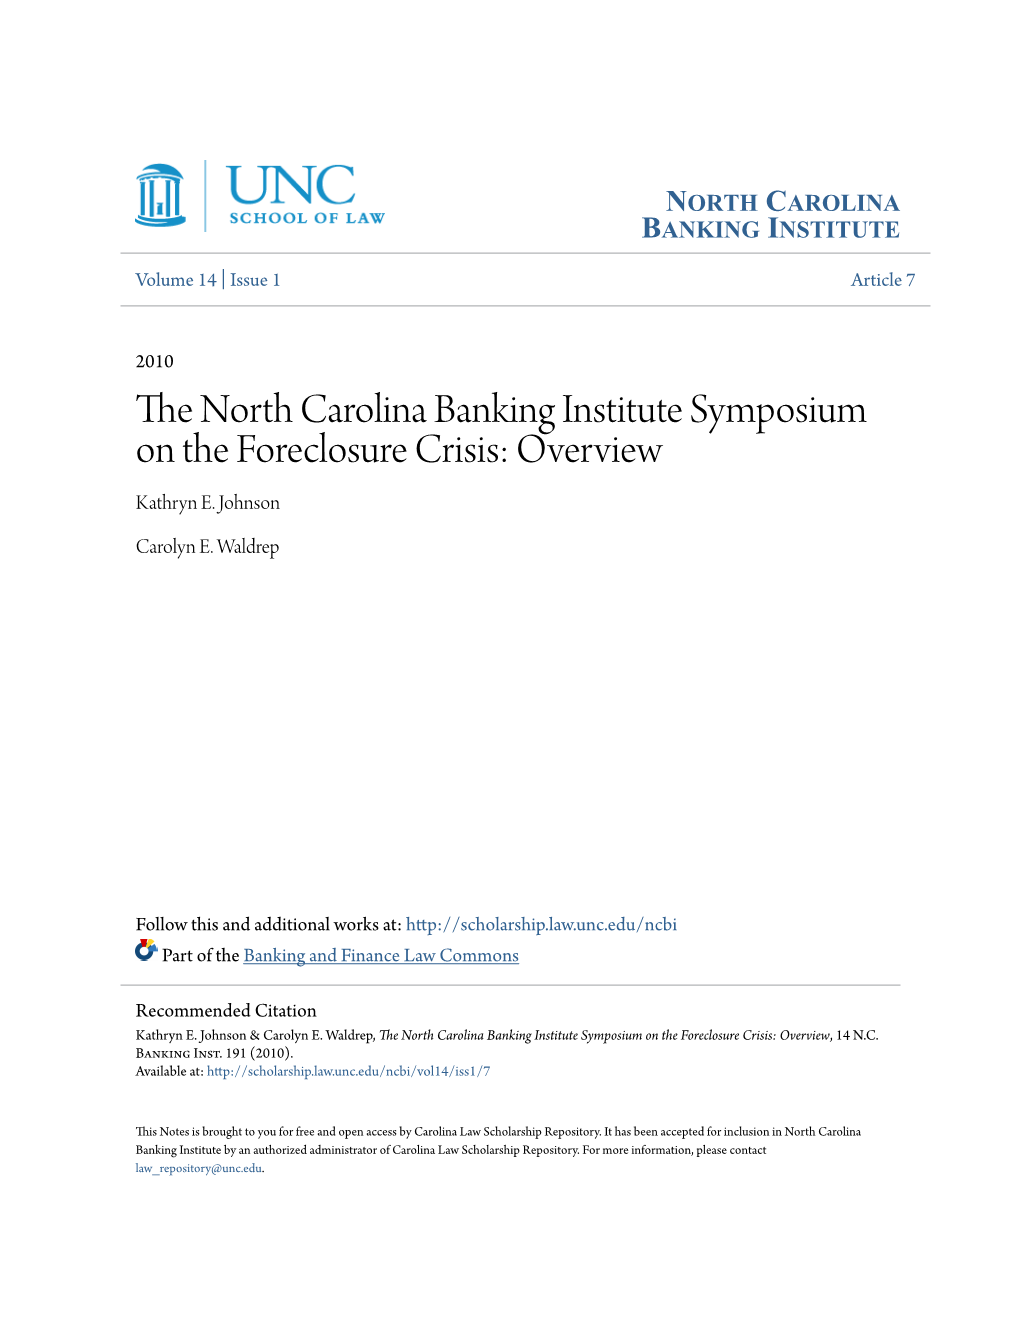 The North Carolina Banking Institute Symposium on the Foreclosure Crisis: Overview, 14 N.C